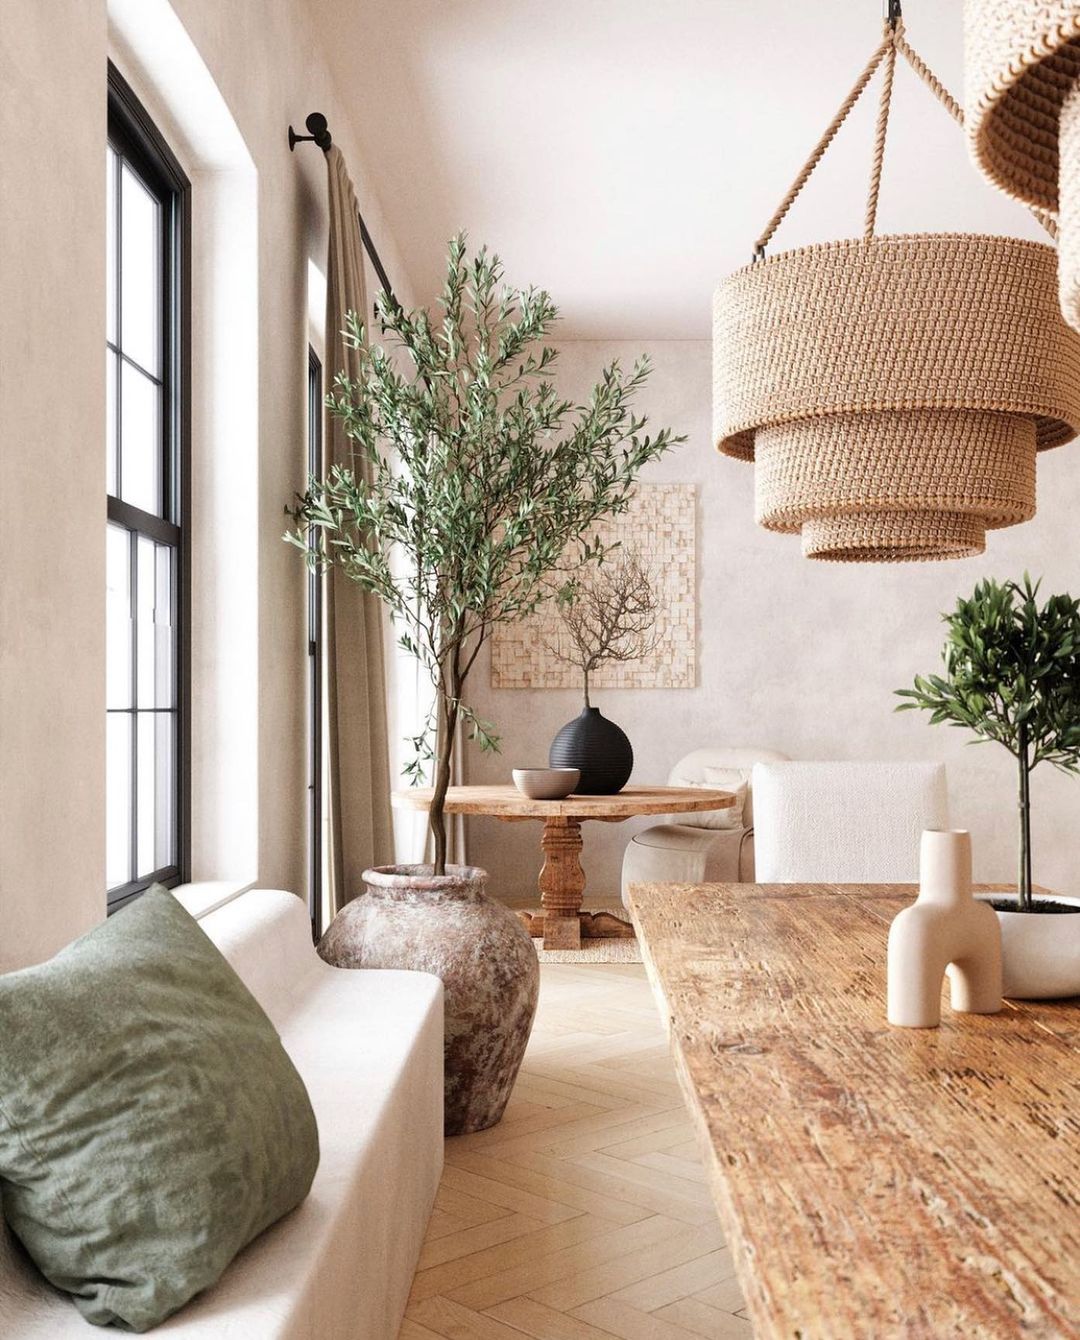 Light, airy dining room with potted accent plants. Photo by Instagram user @my_atmosphera